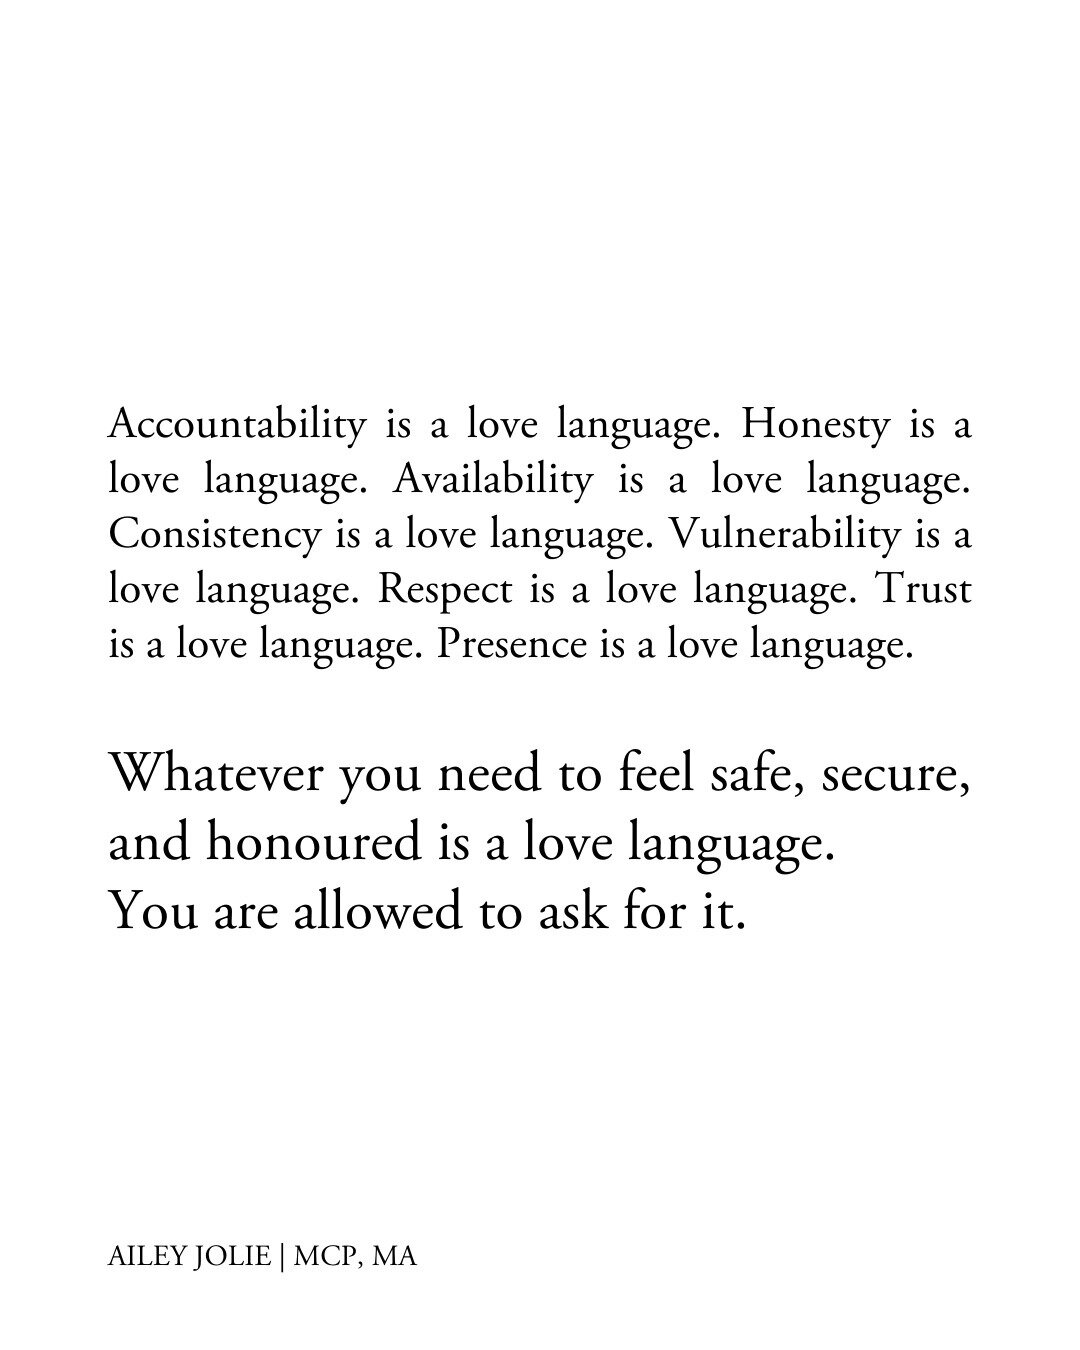 Accountability is a love language. Honesty is a love language. Availability is a love language. Consistency is a love language. Vulnerability is a love language. Respect is a love language. Trust is a love language. Presence is a love language.

What